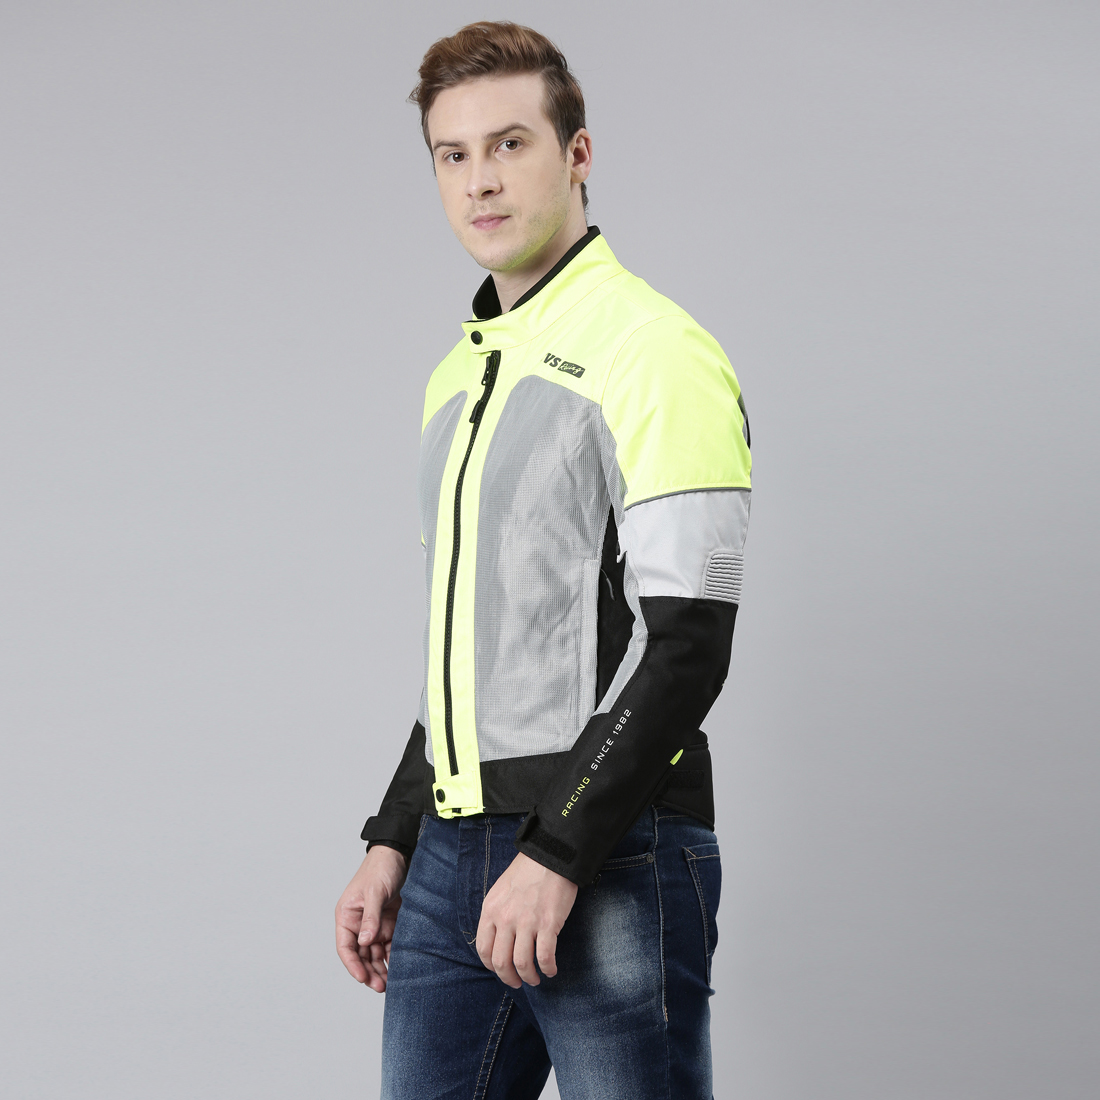 TVS Racing Road Zipper Riding Jacket for Men- High Abrasion 600D Polyester, CE Level 2 Armour Protection – Essential Bike Jacket for Bikers (Neon)